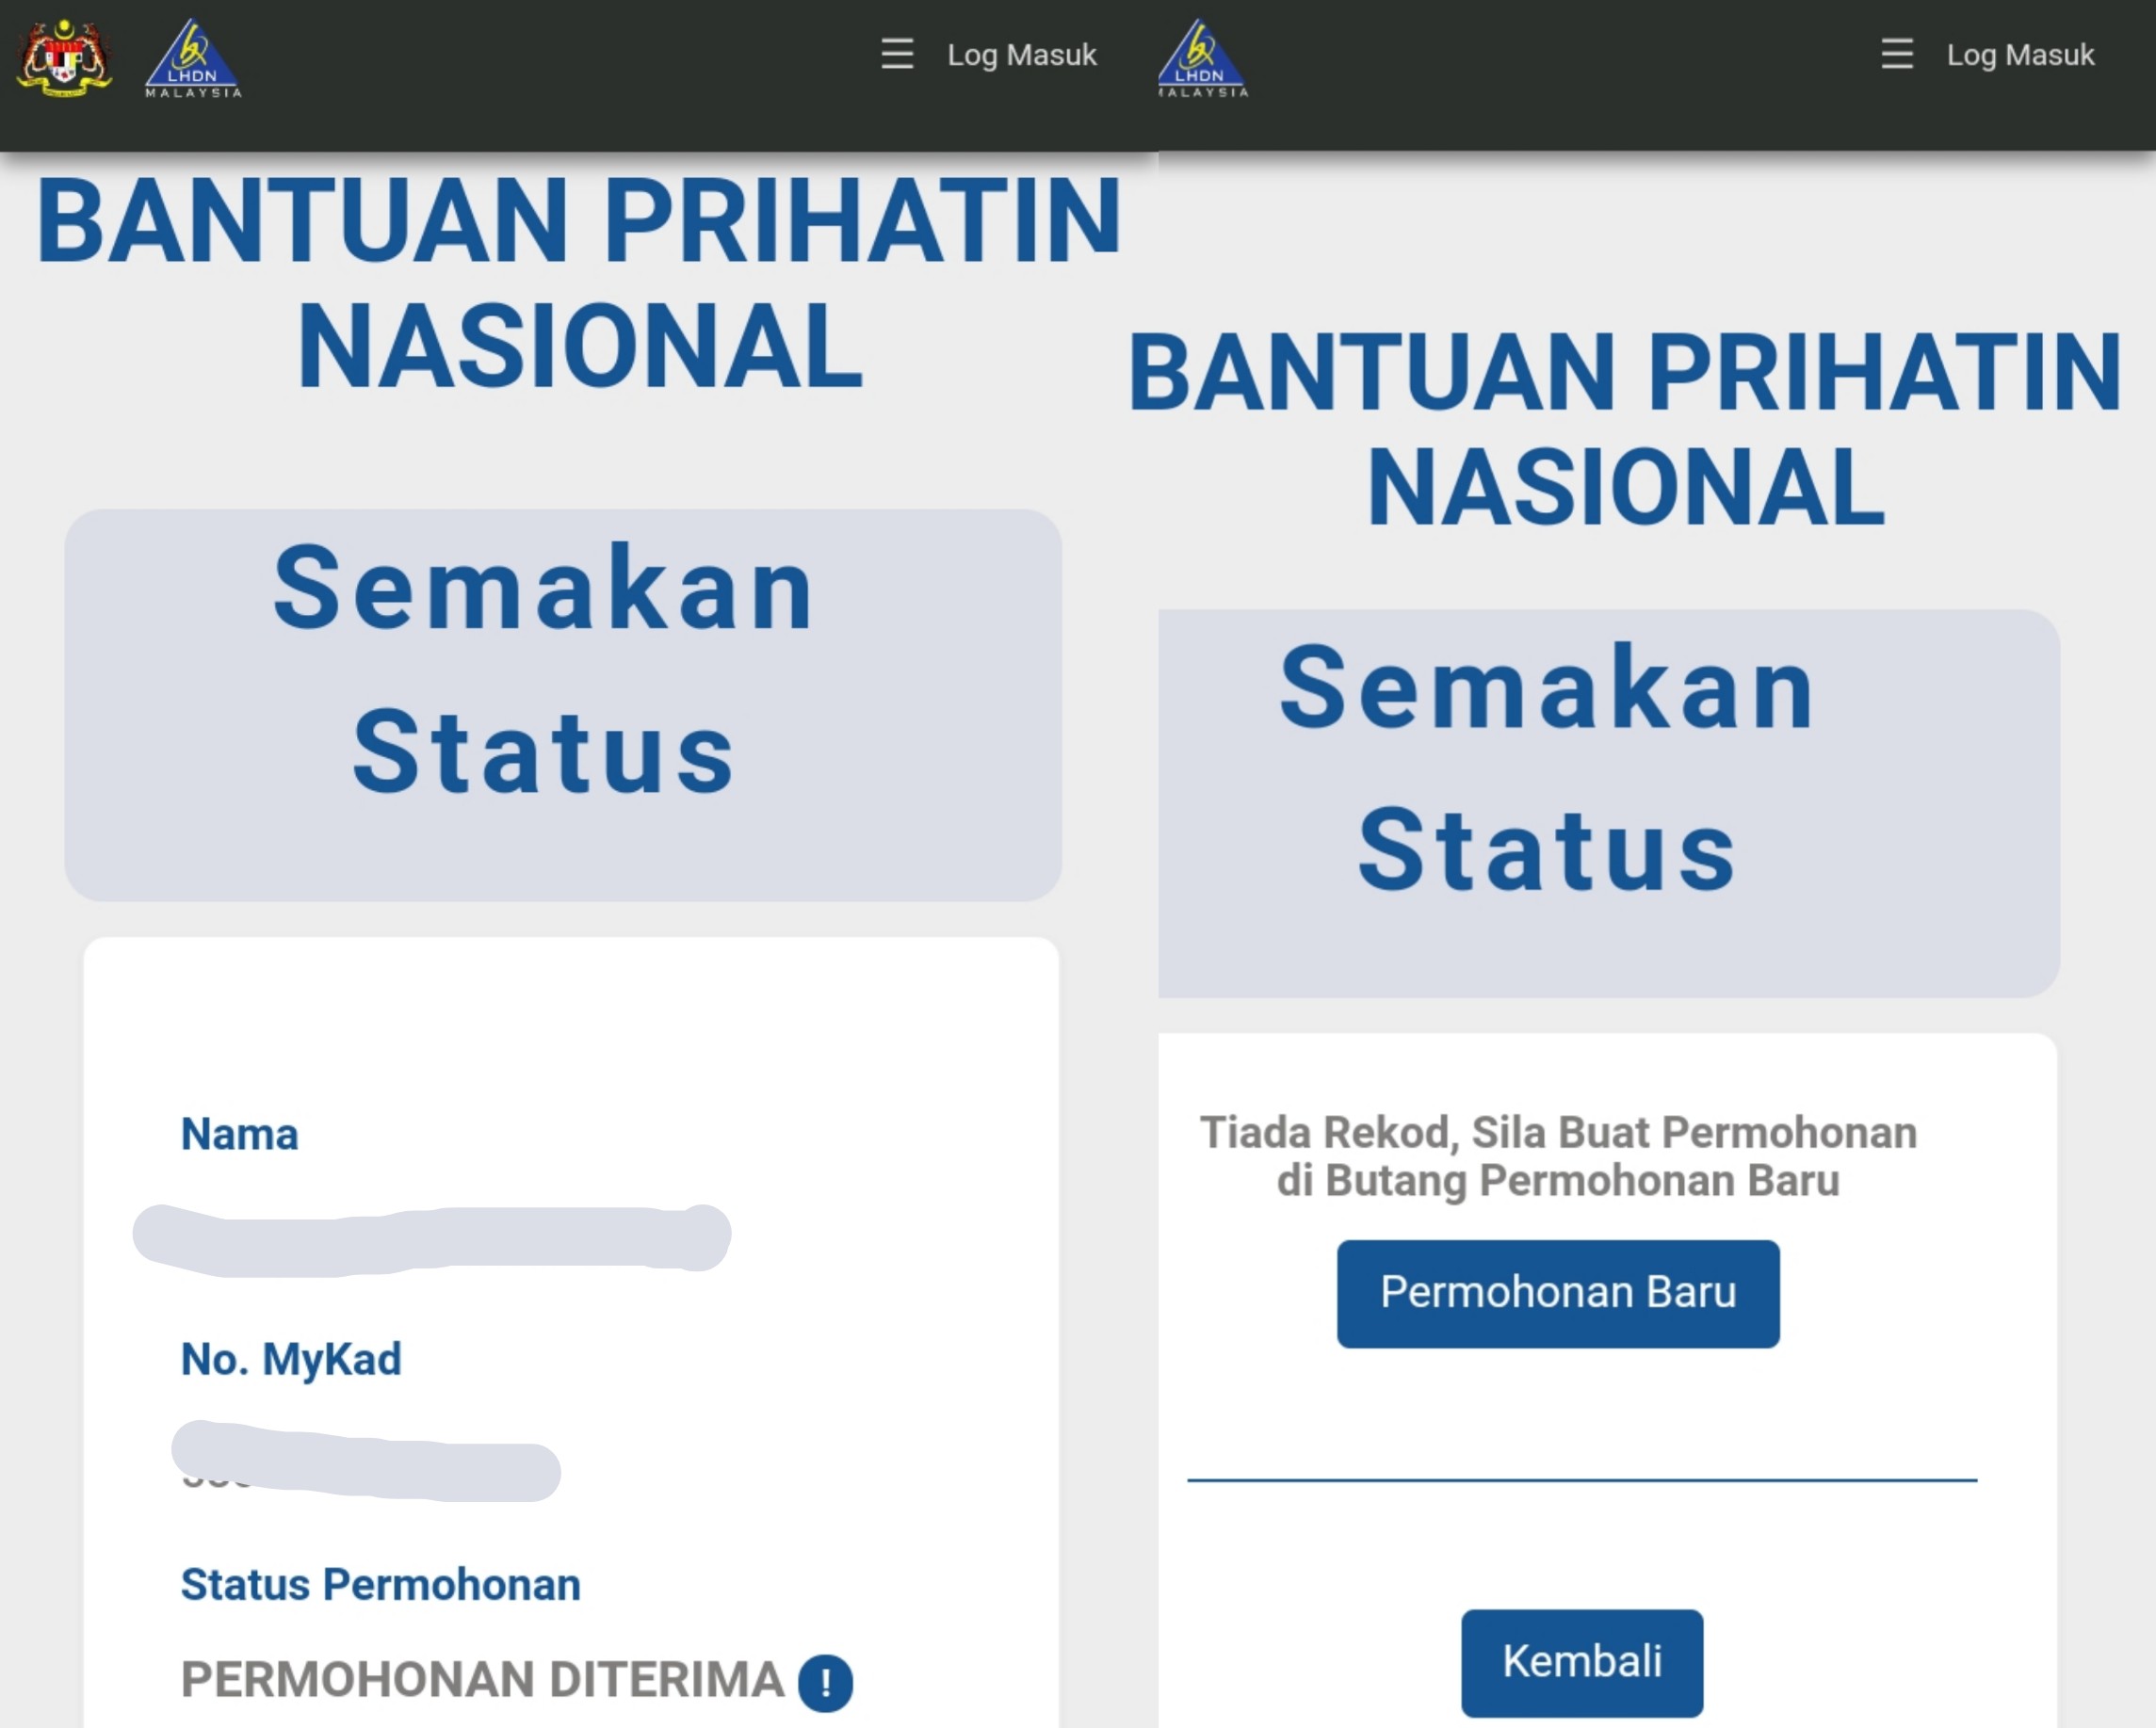 Lhdn contact number bpn